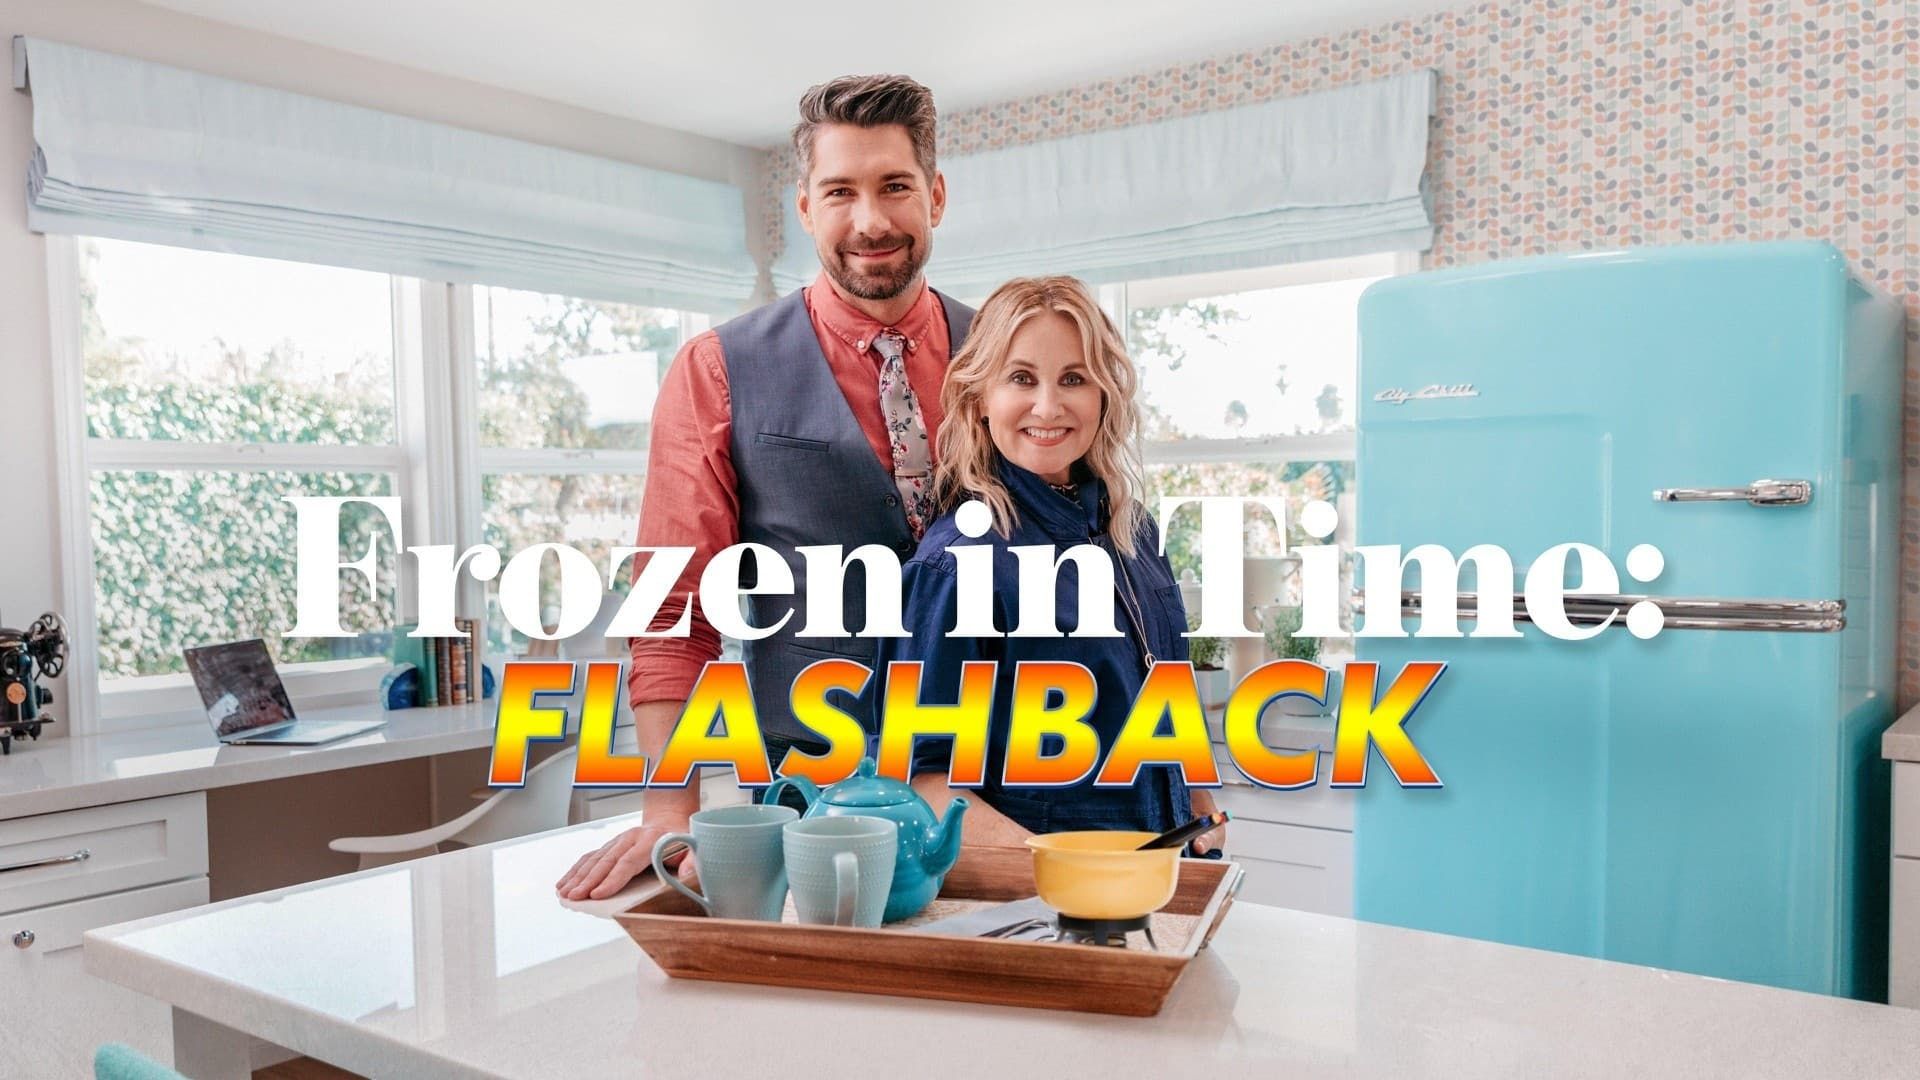 Frozen in Time: Flashback background